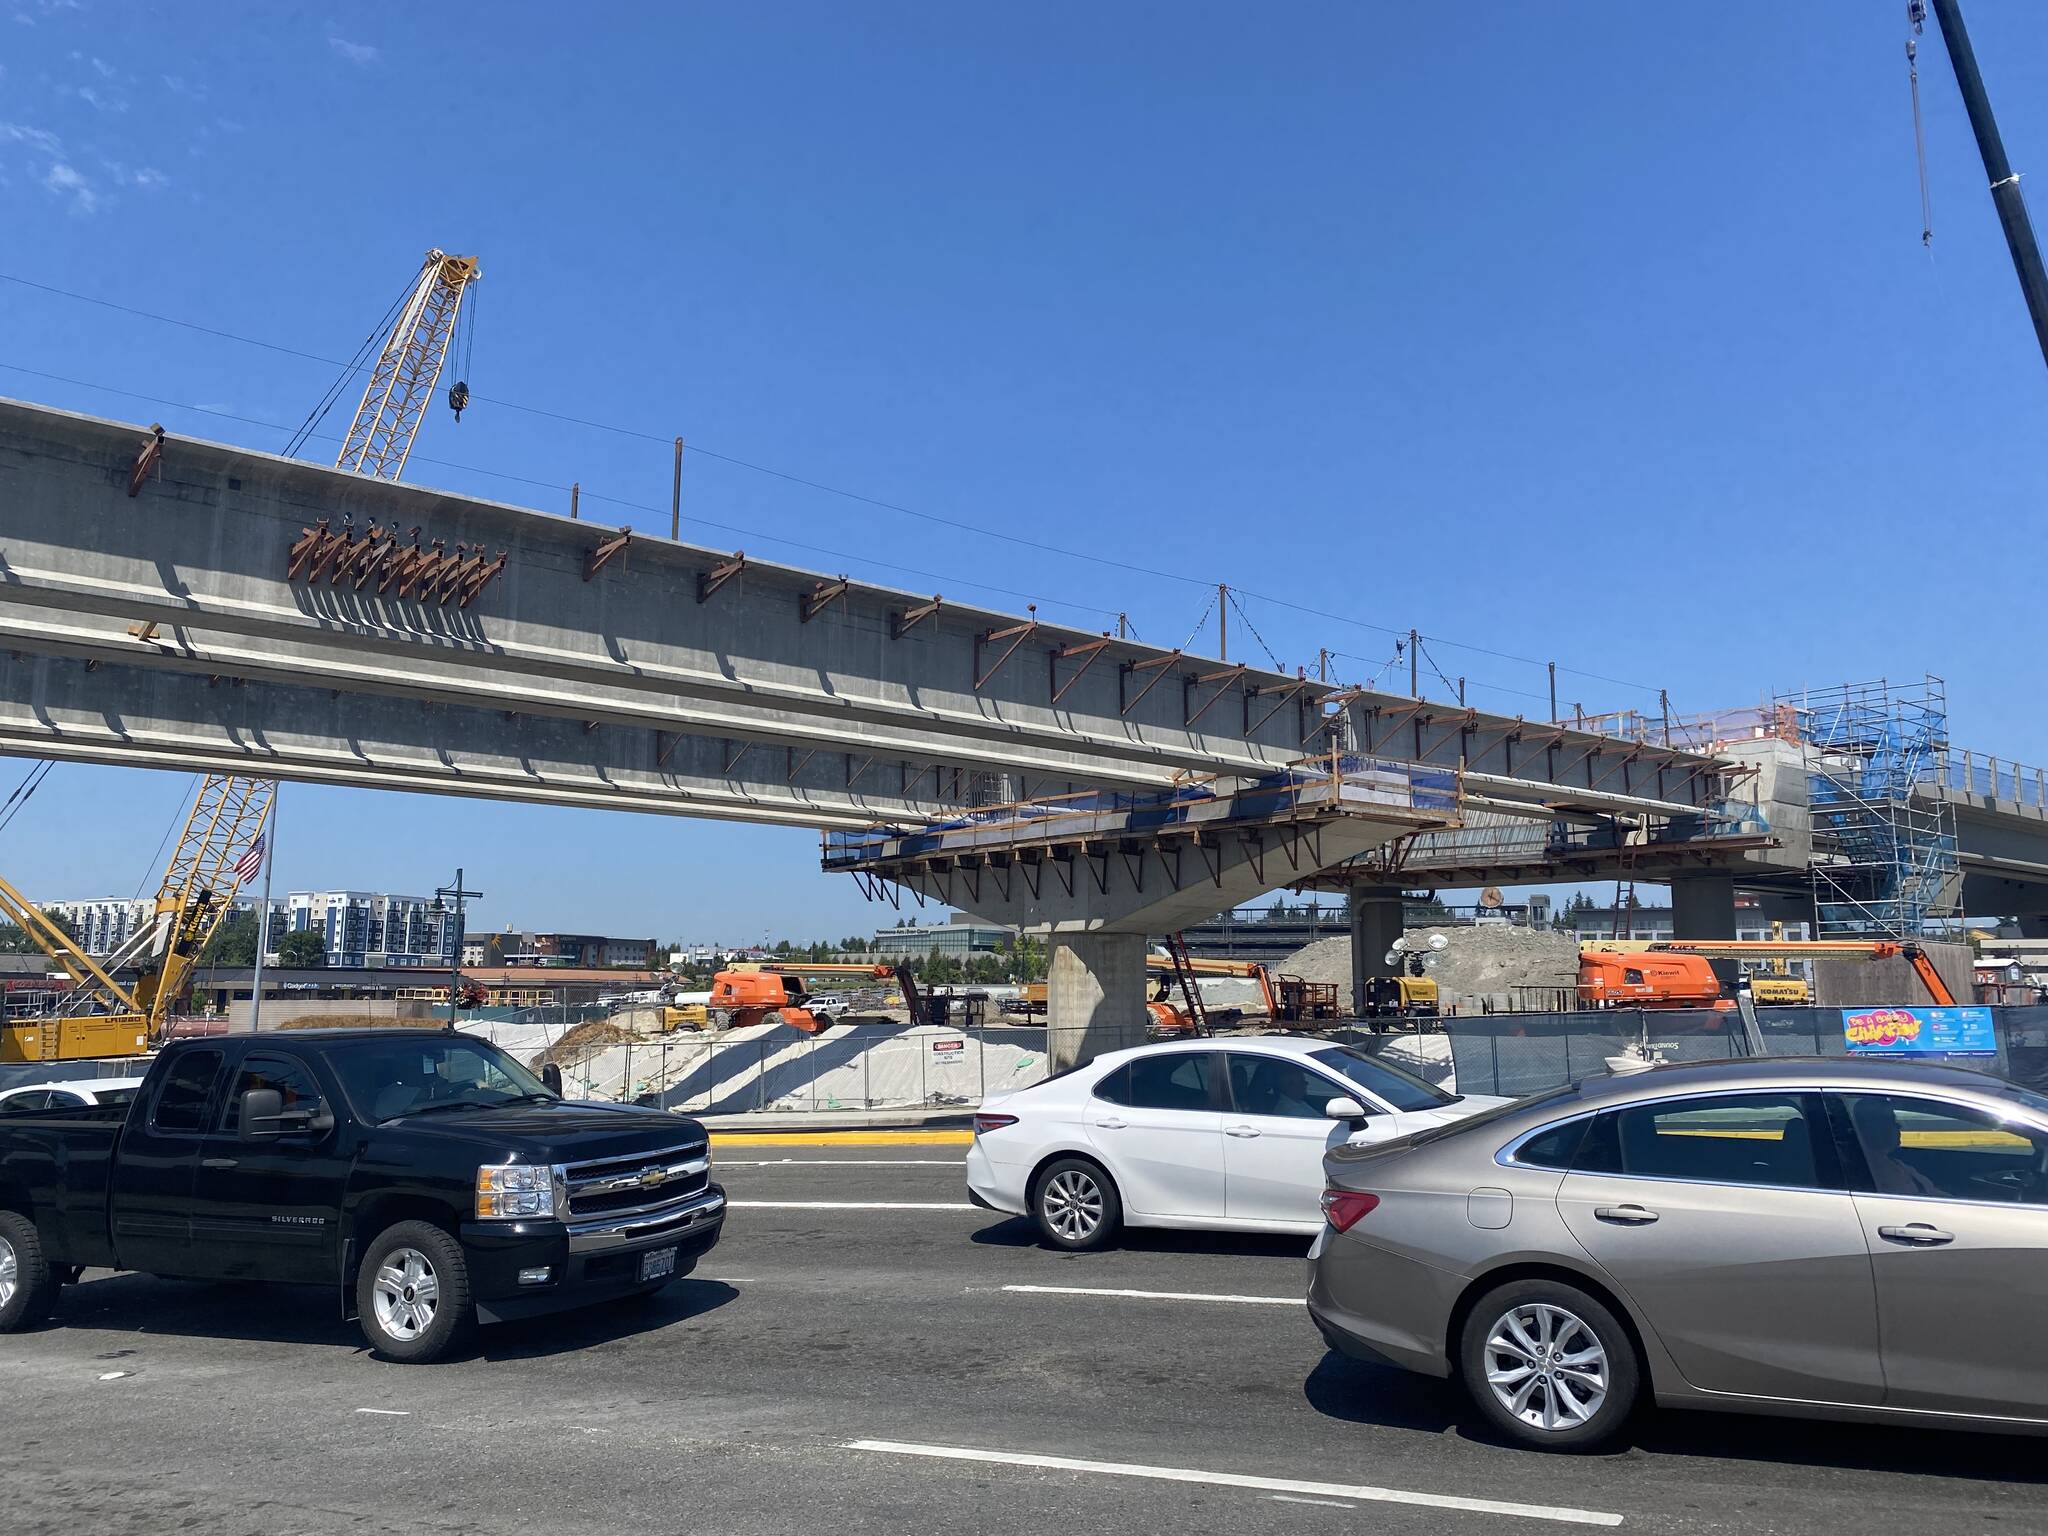 Sound Transit installs elevated tracks over S. 320th Street in Federal Way